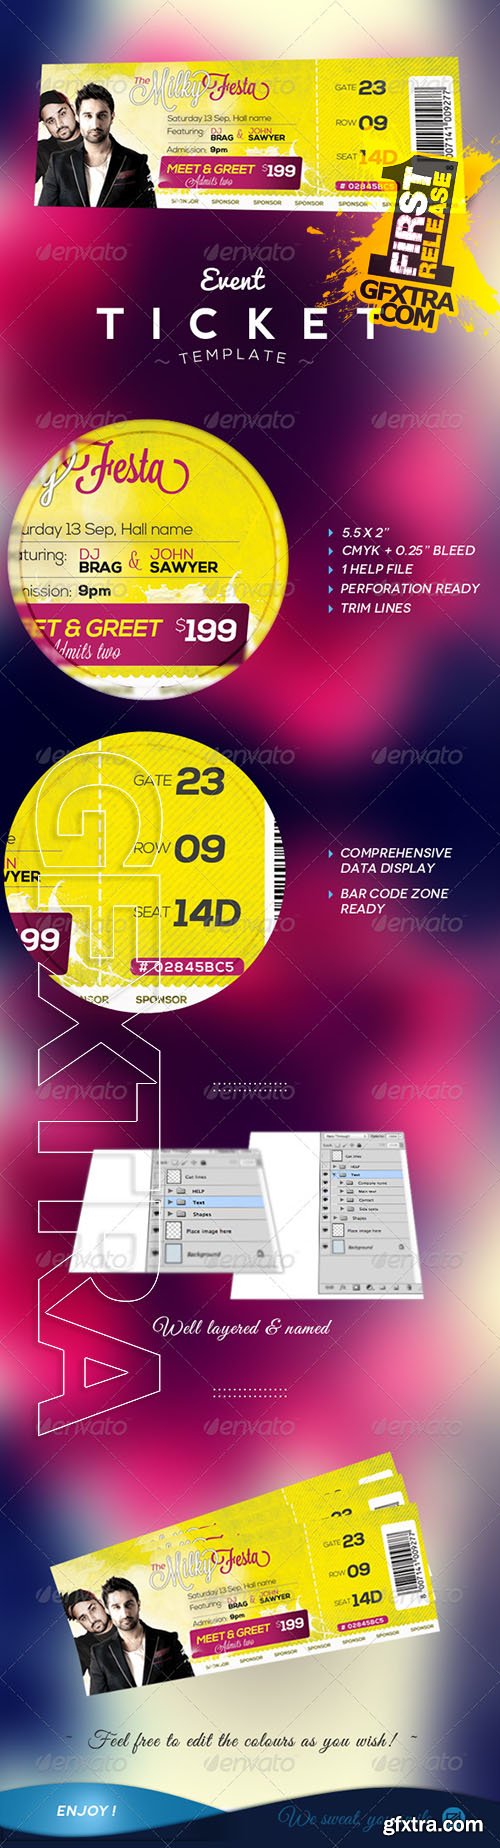 Event Tickets Template - Graphicriver 5813141